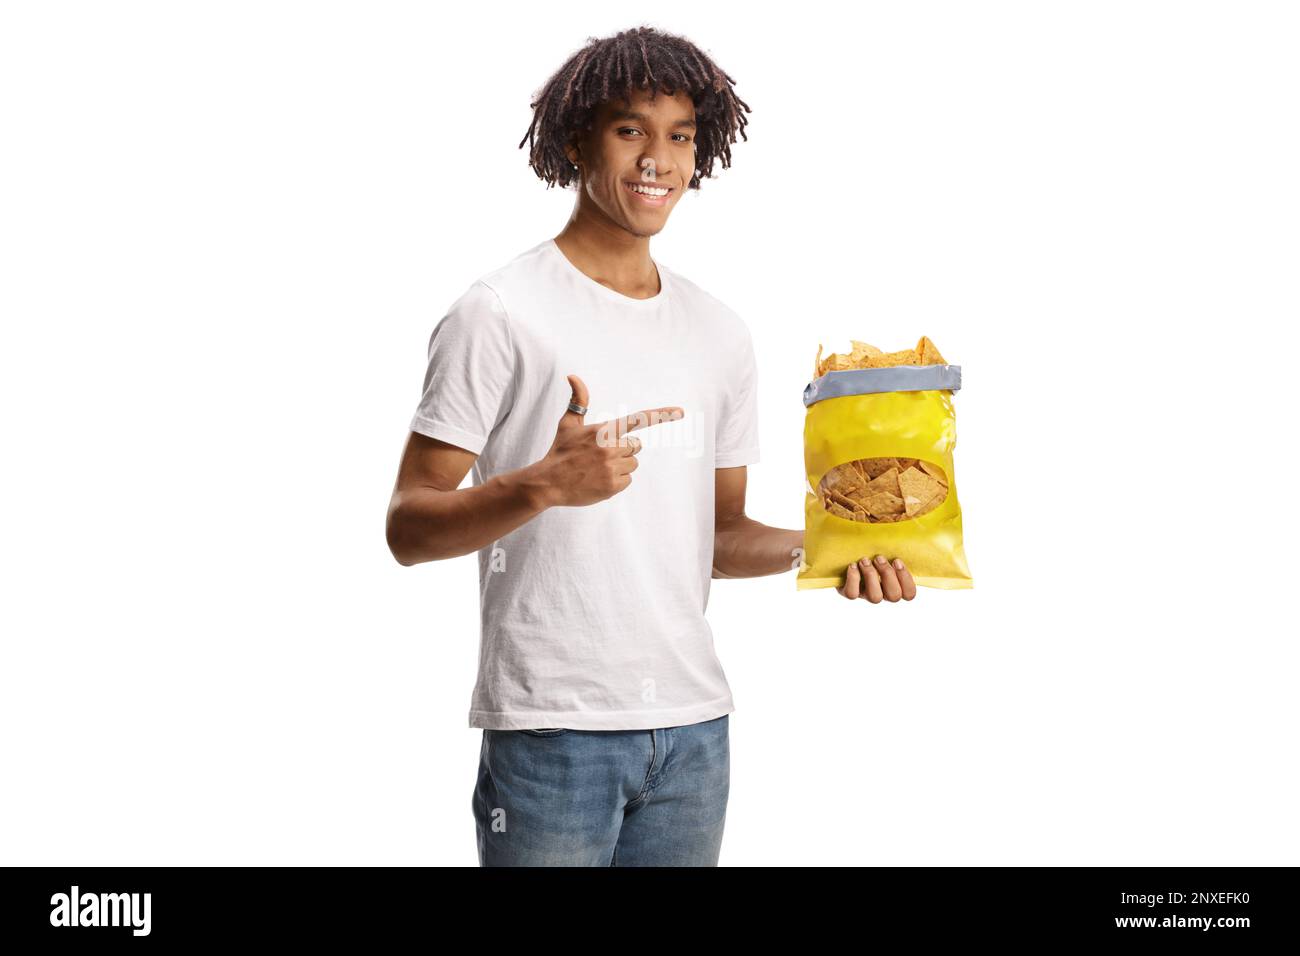 Young african american man pointing at a pack of tortilla crisps and smiling isolated on white background Stock Photo